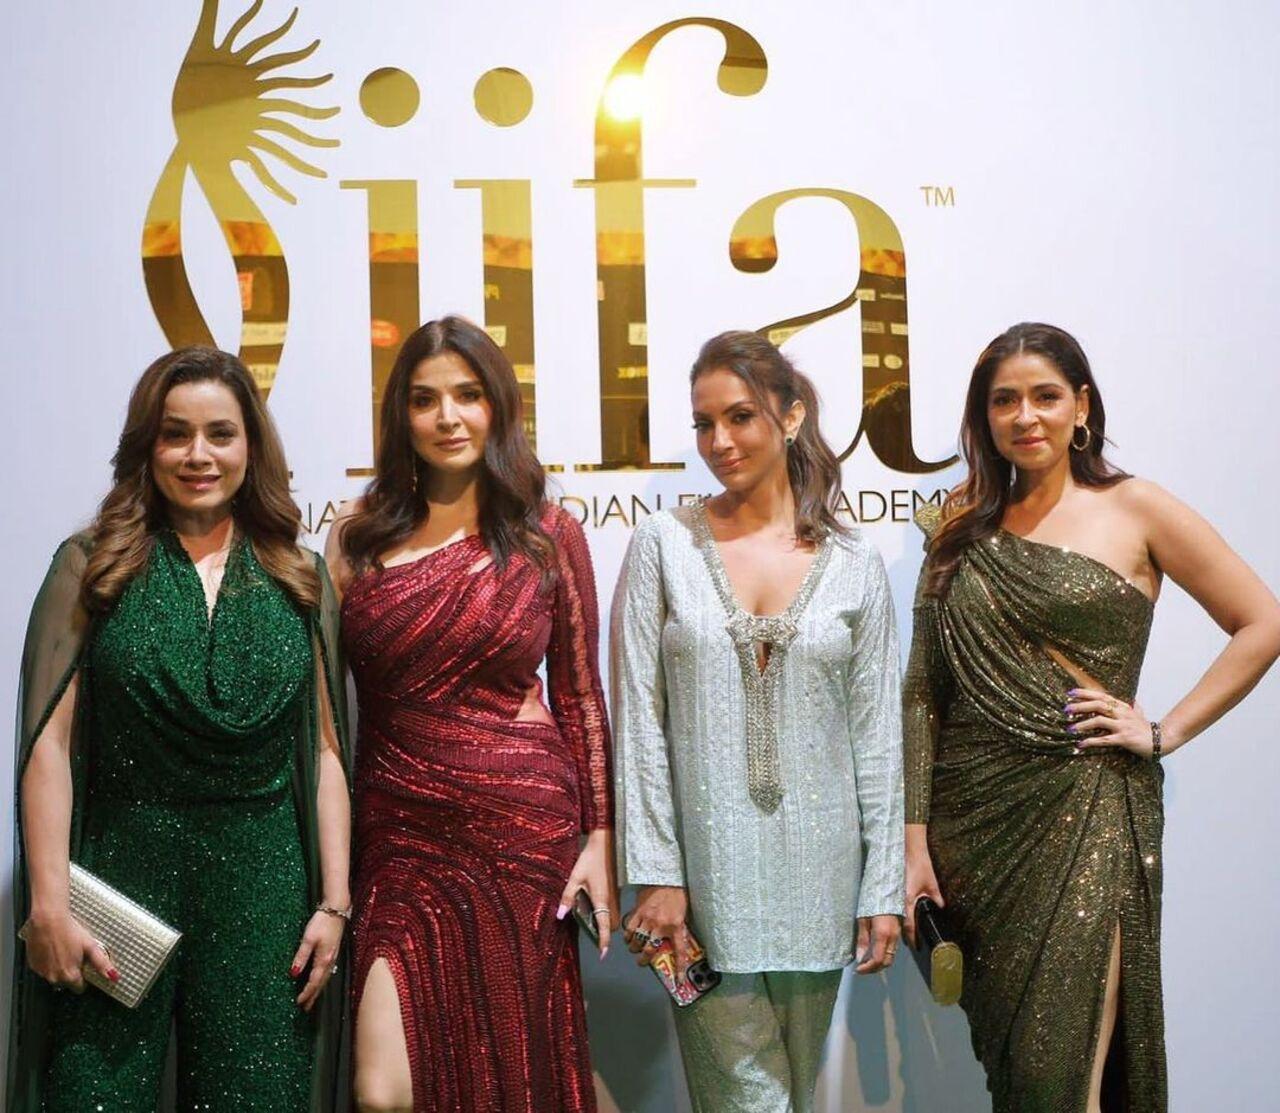 The Fabulous Lives of Bollywood Wives will return for the third season of the reality show